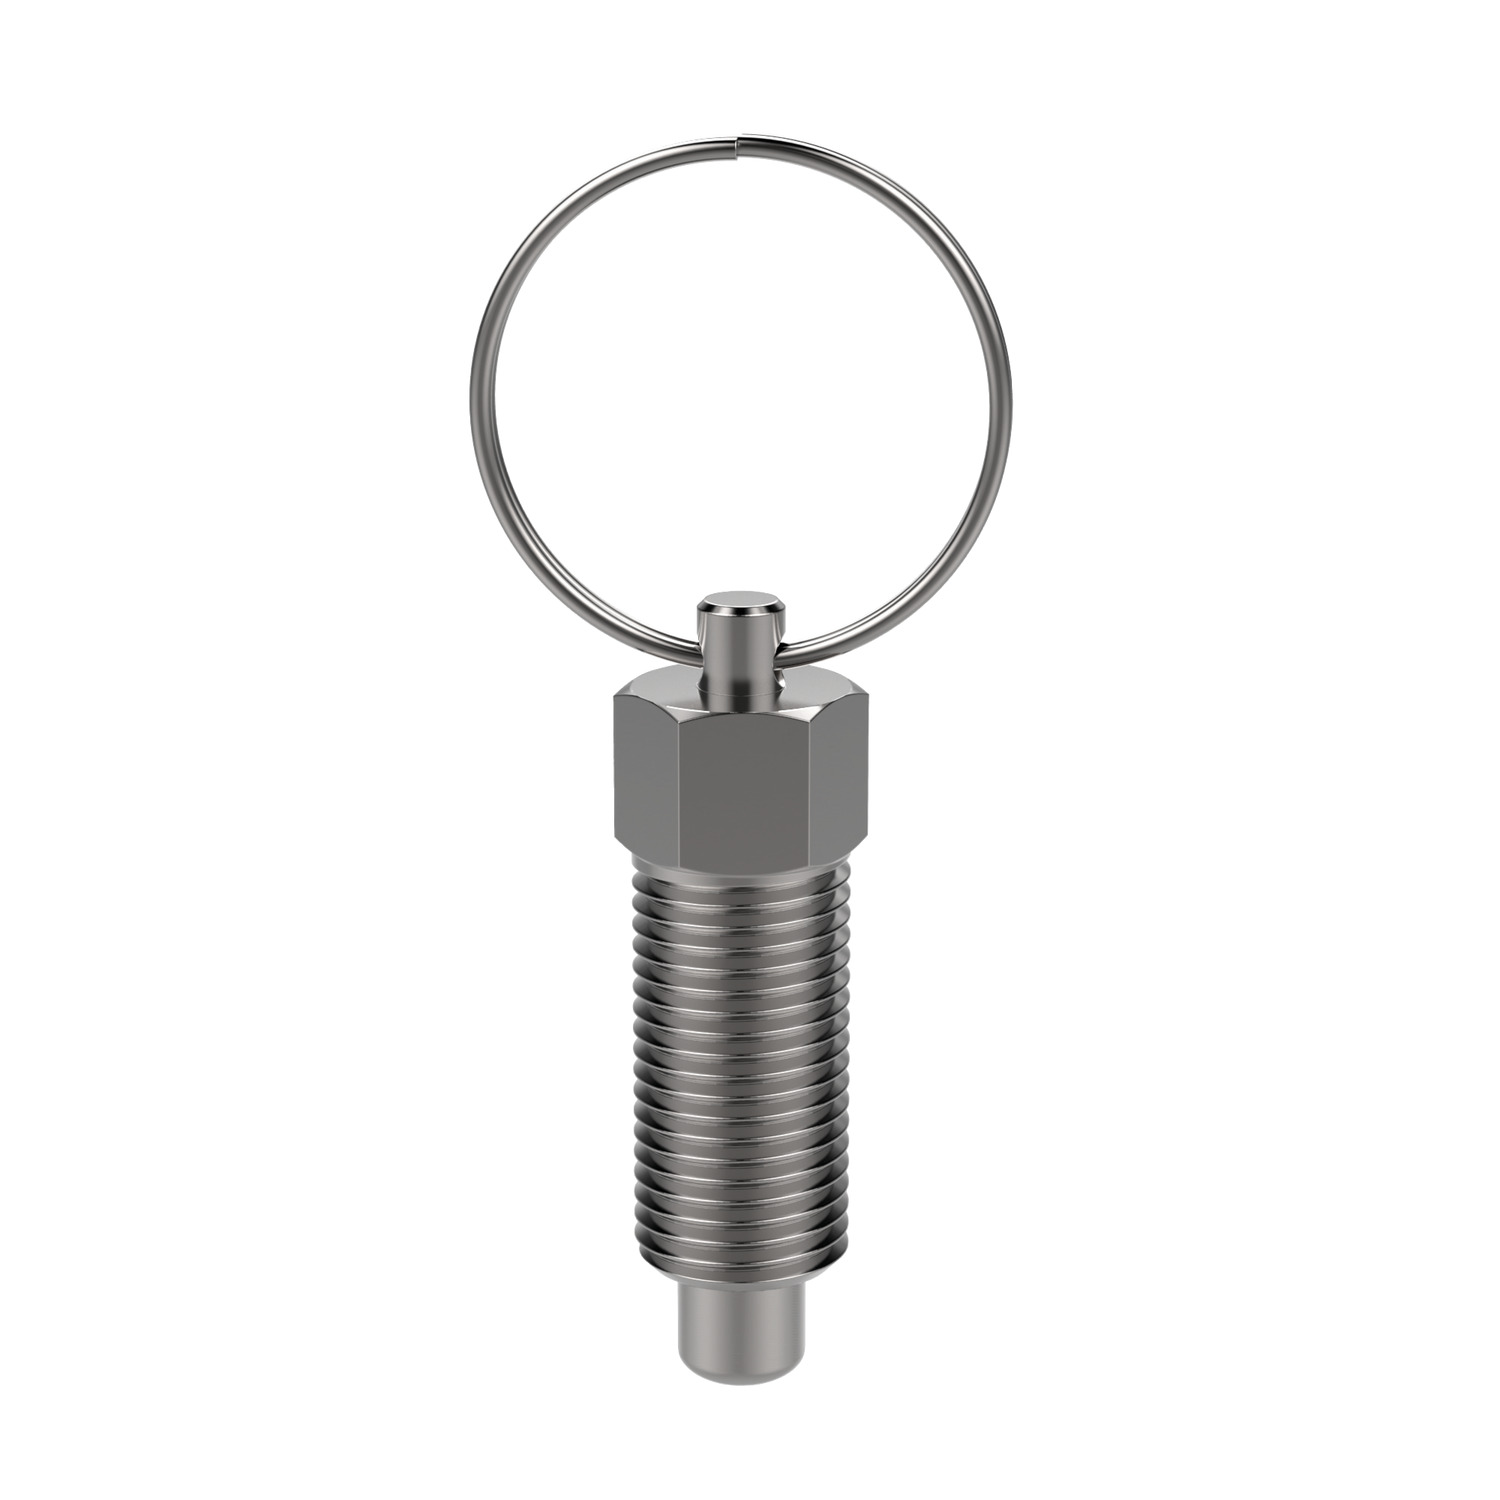 32550.W0724 Index Plungers - Free cutting steel Pull Ring - Non Locking - 4 - M 6x1,00